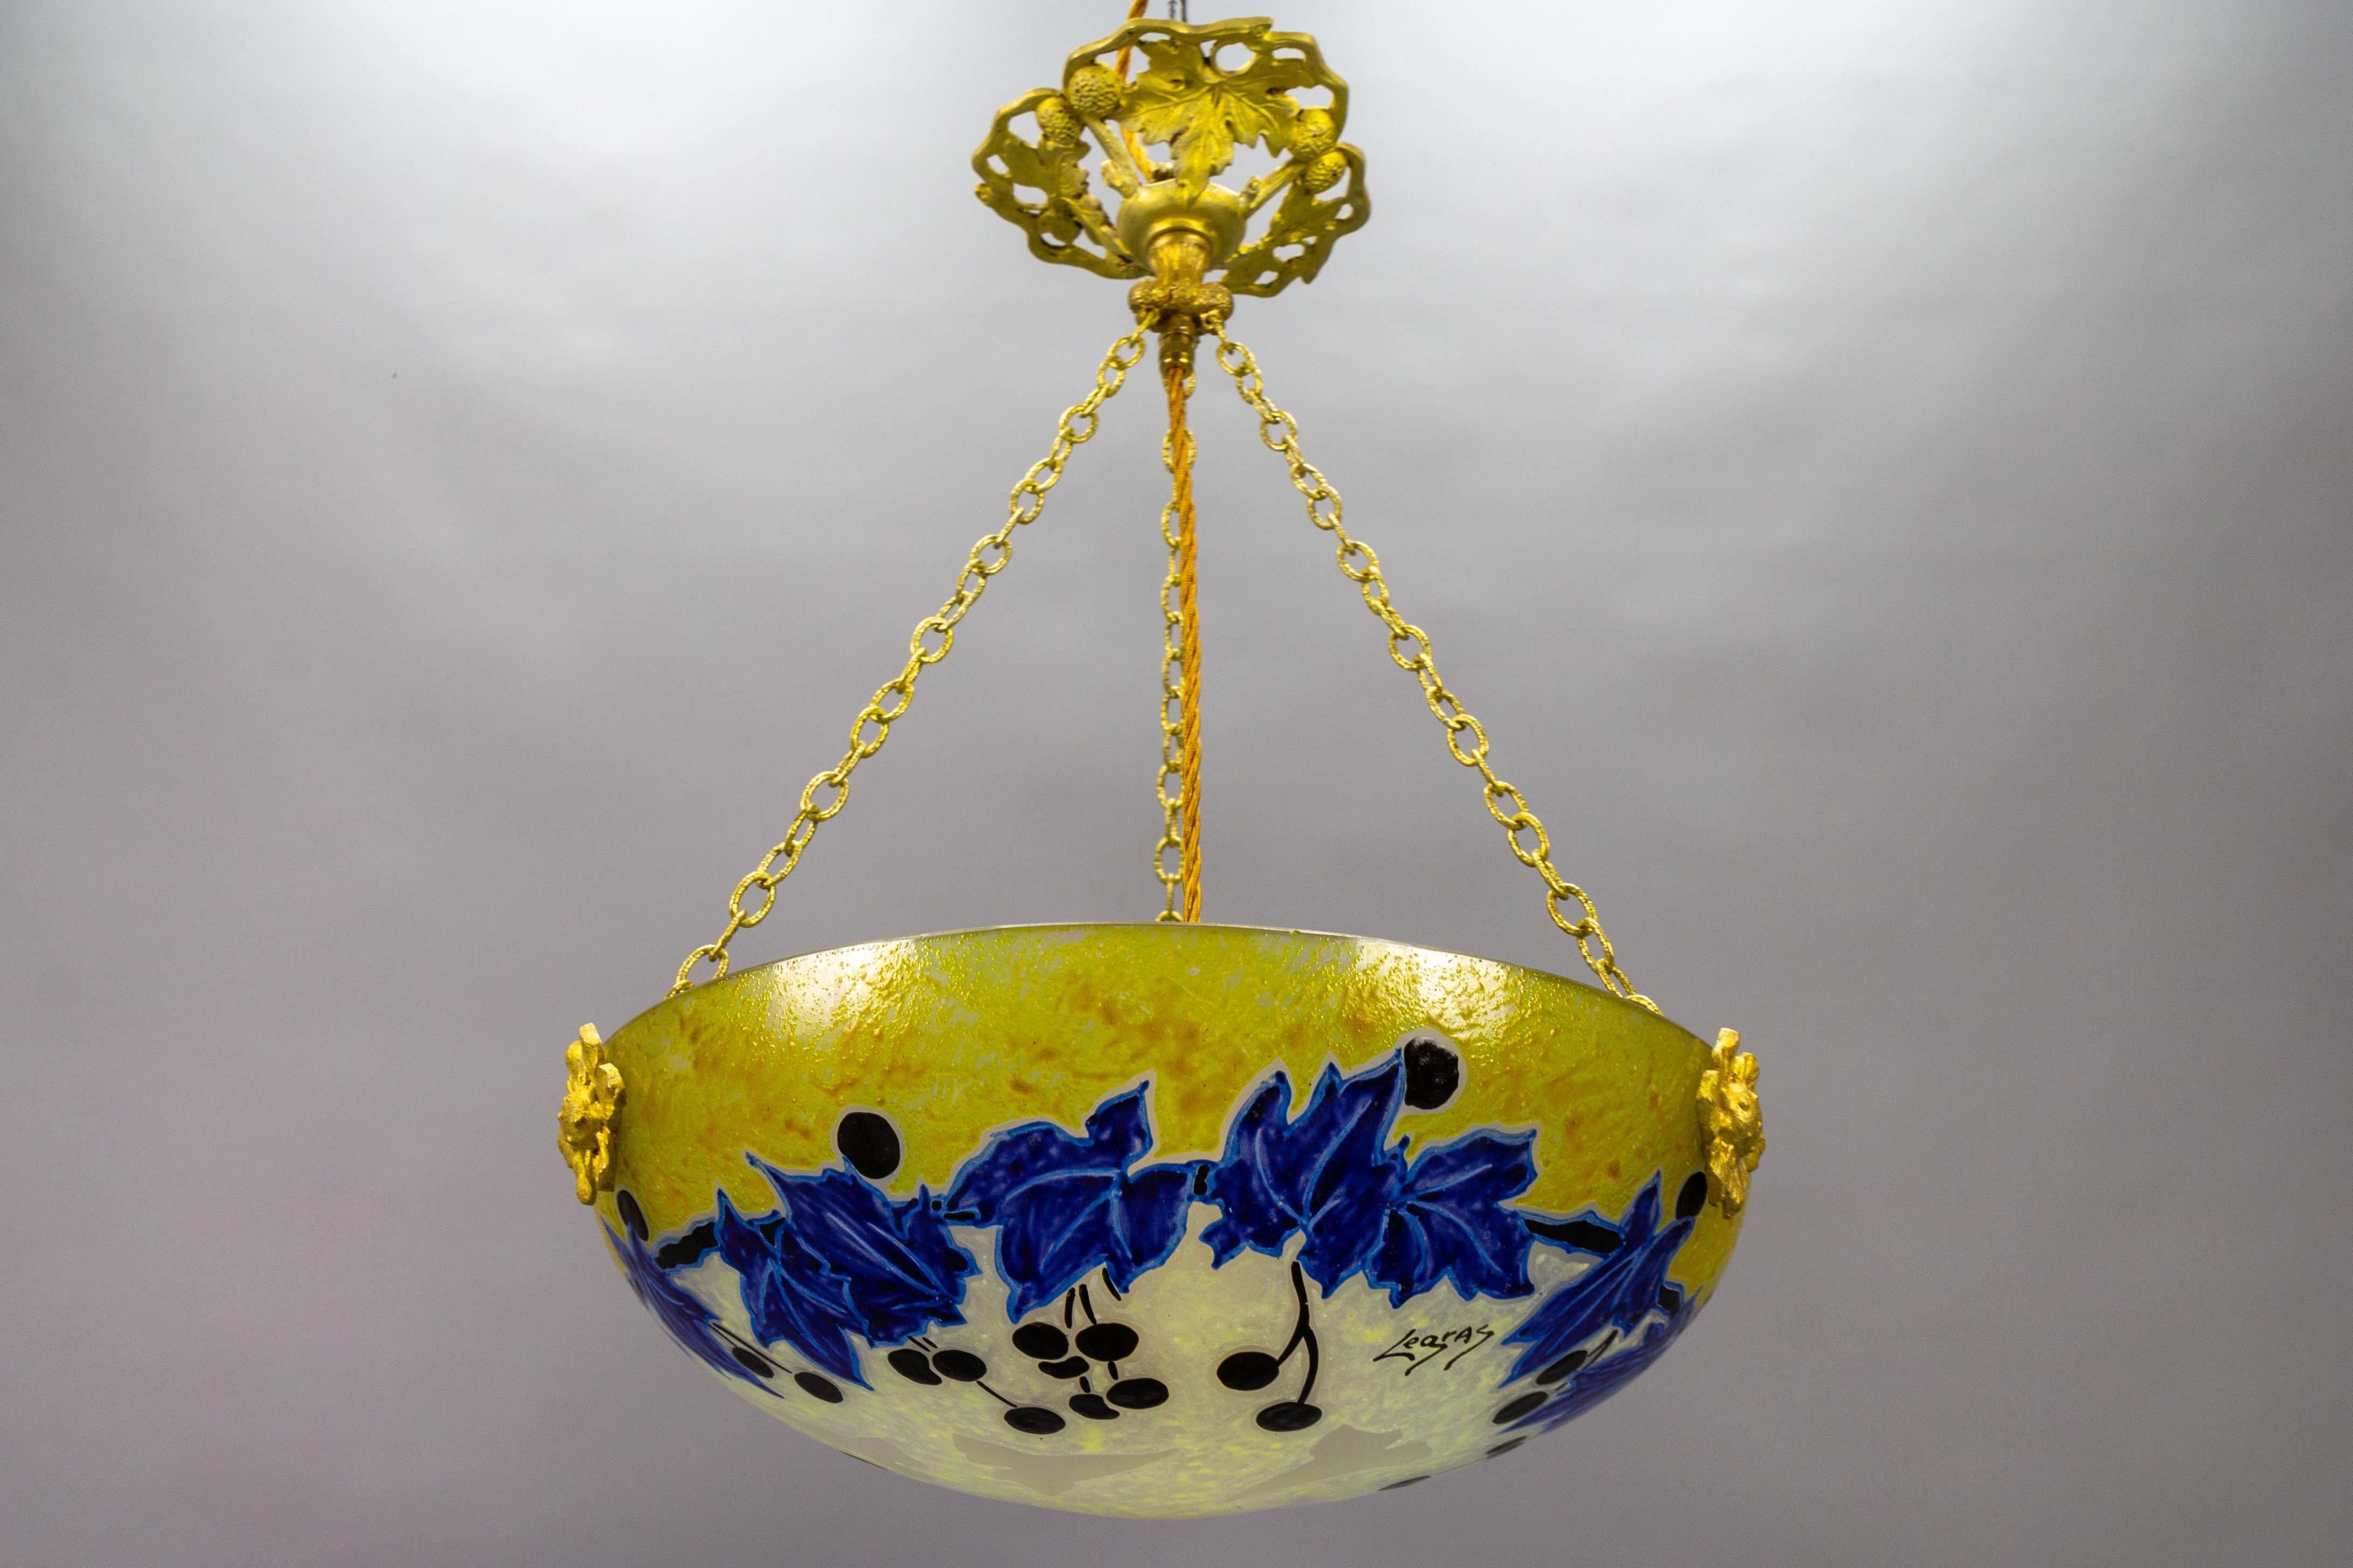 French Art Nouveau pendant light with yellow and blue glass and ivy motifs signed Legras, circa 1920.
This gorgeous Art Nouveau period pendant light features a frosted glass bowl with enameled hand-painted stylized ivy leaves and fruits in blue,